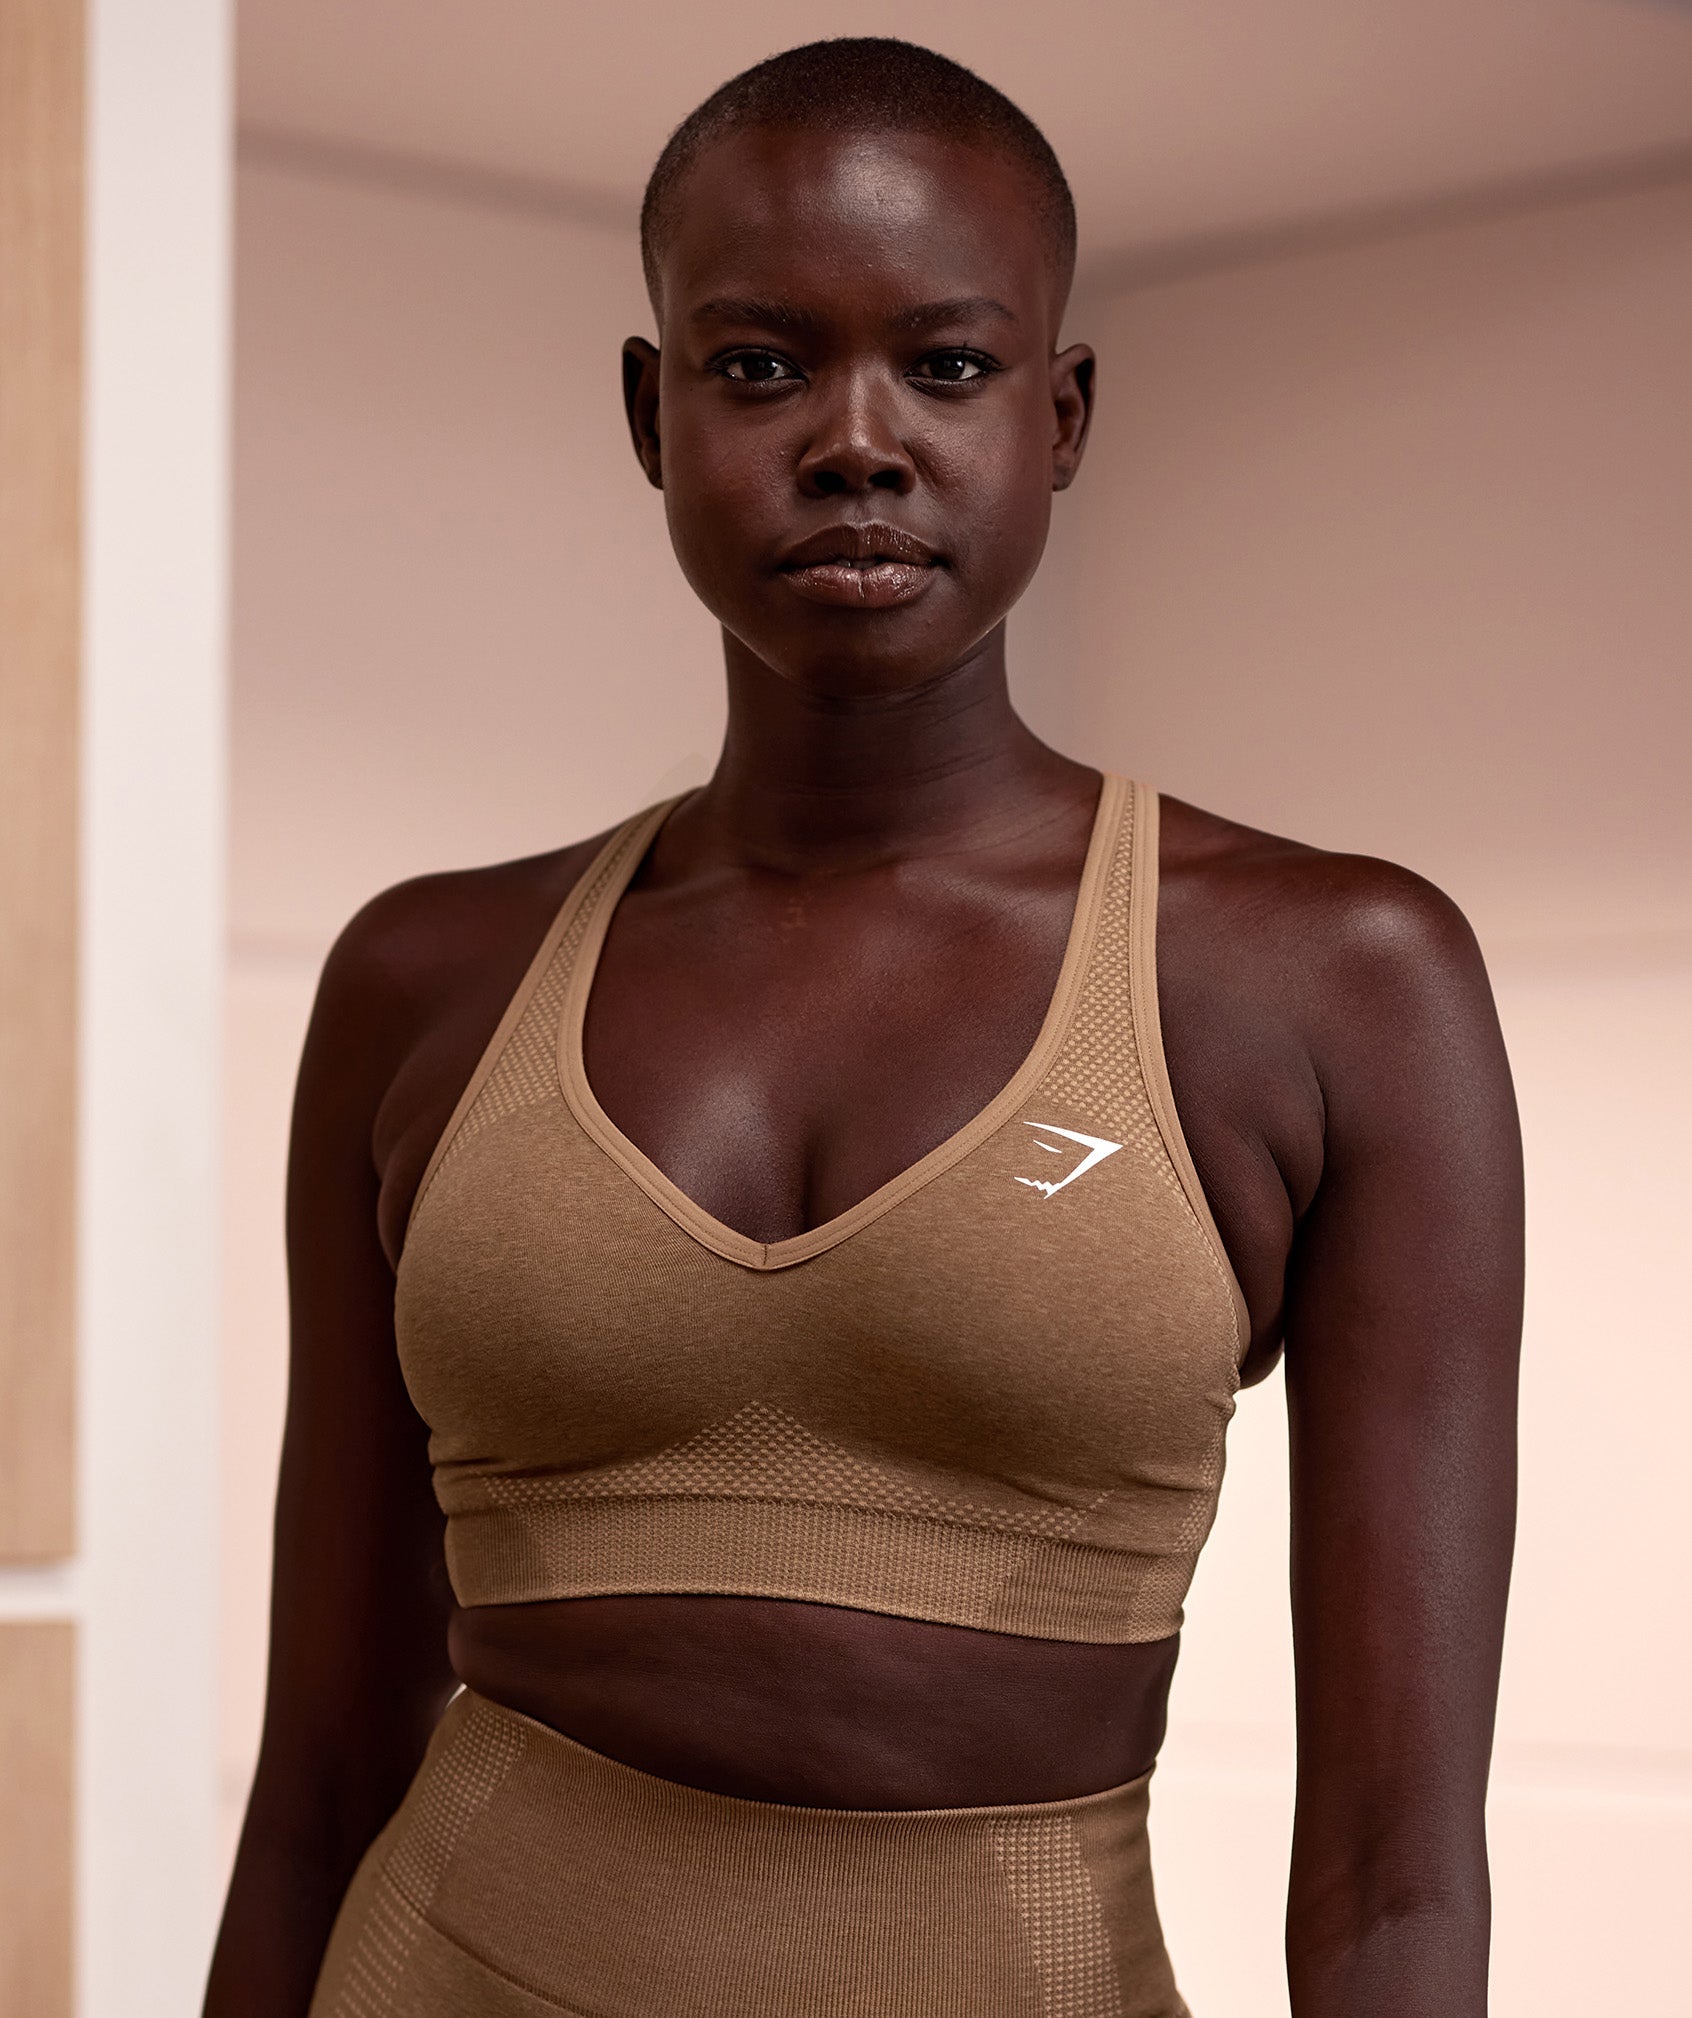 Vital Seamless V Neck Sports Bra in {{variantColor} is out of stock